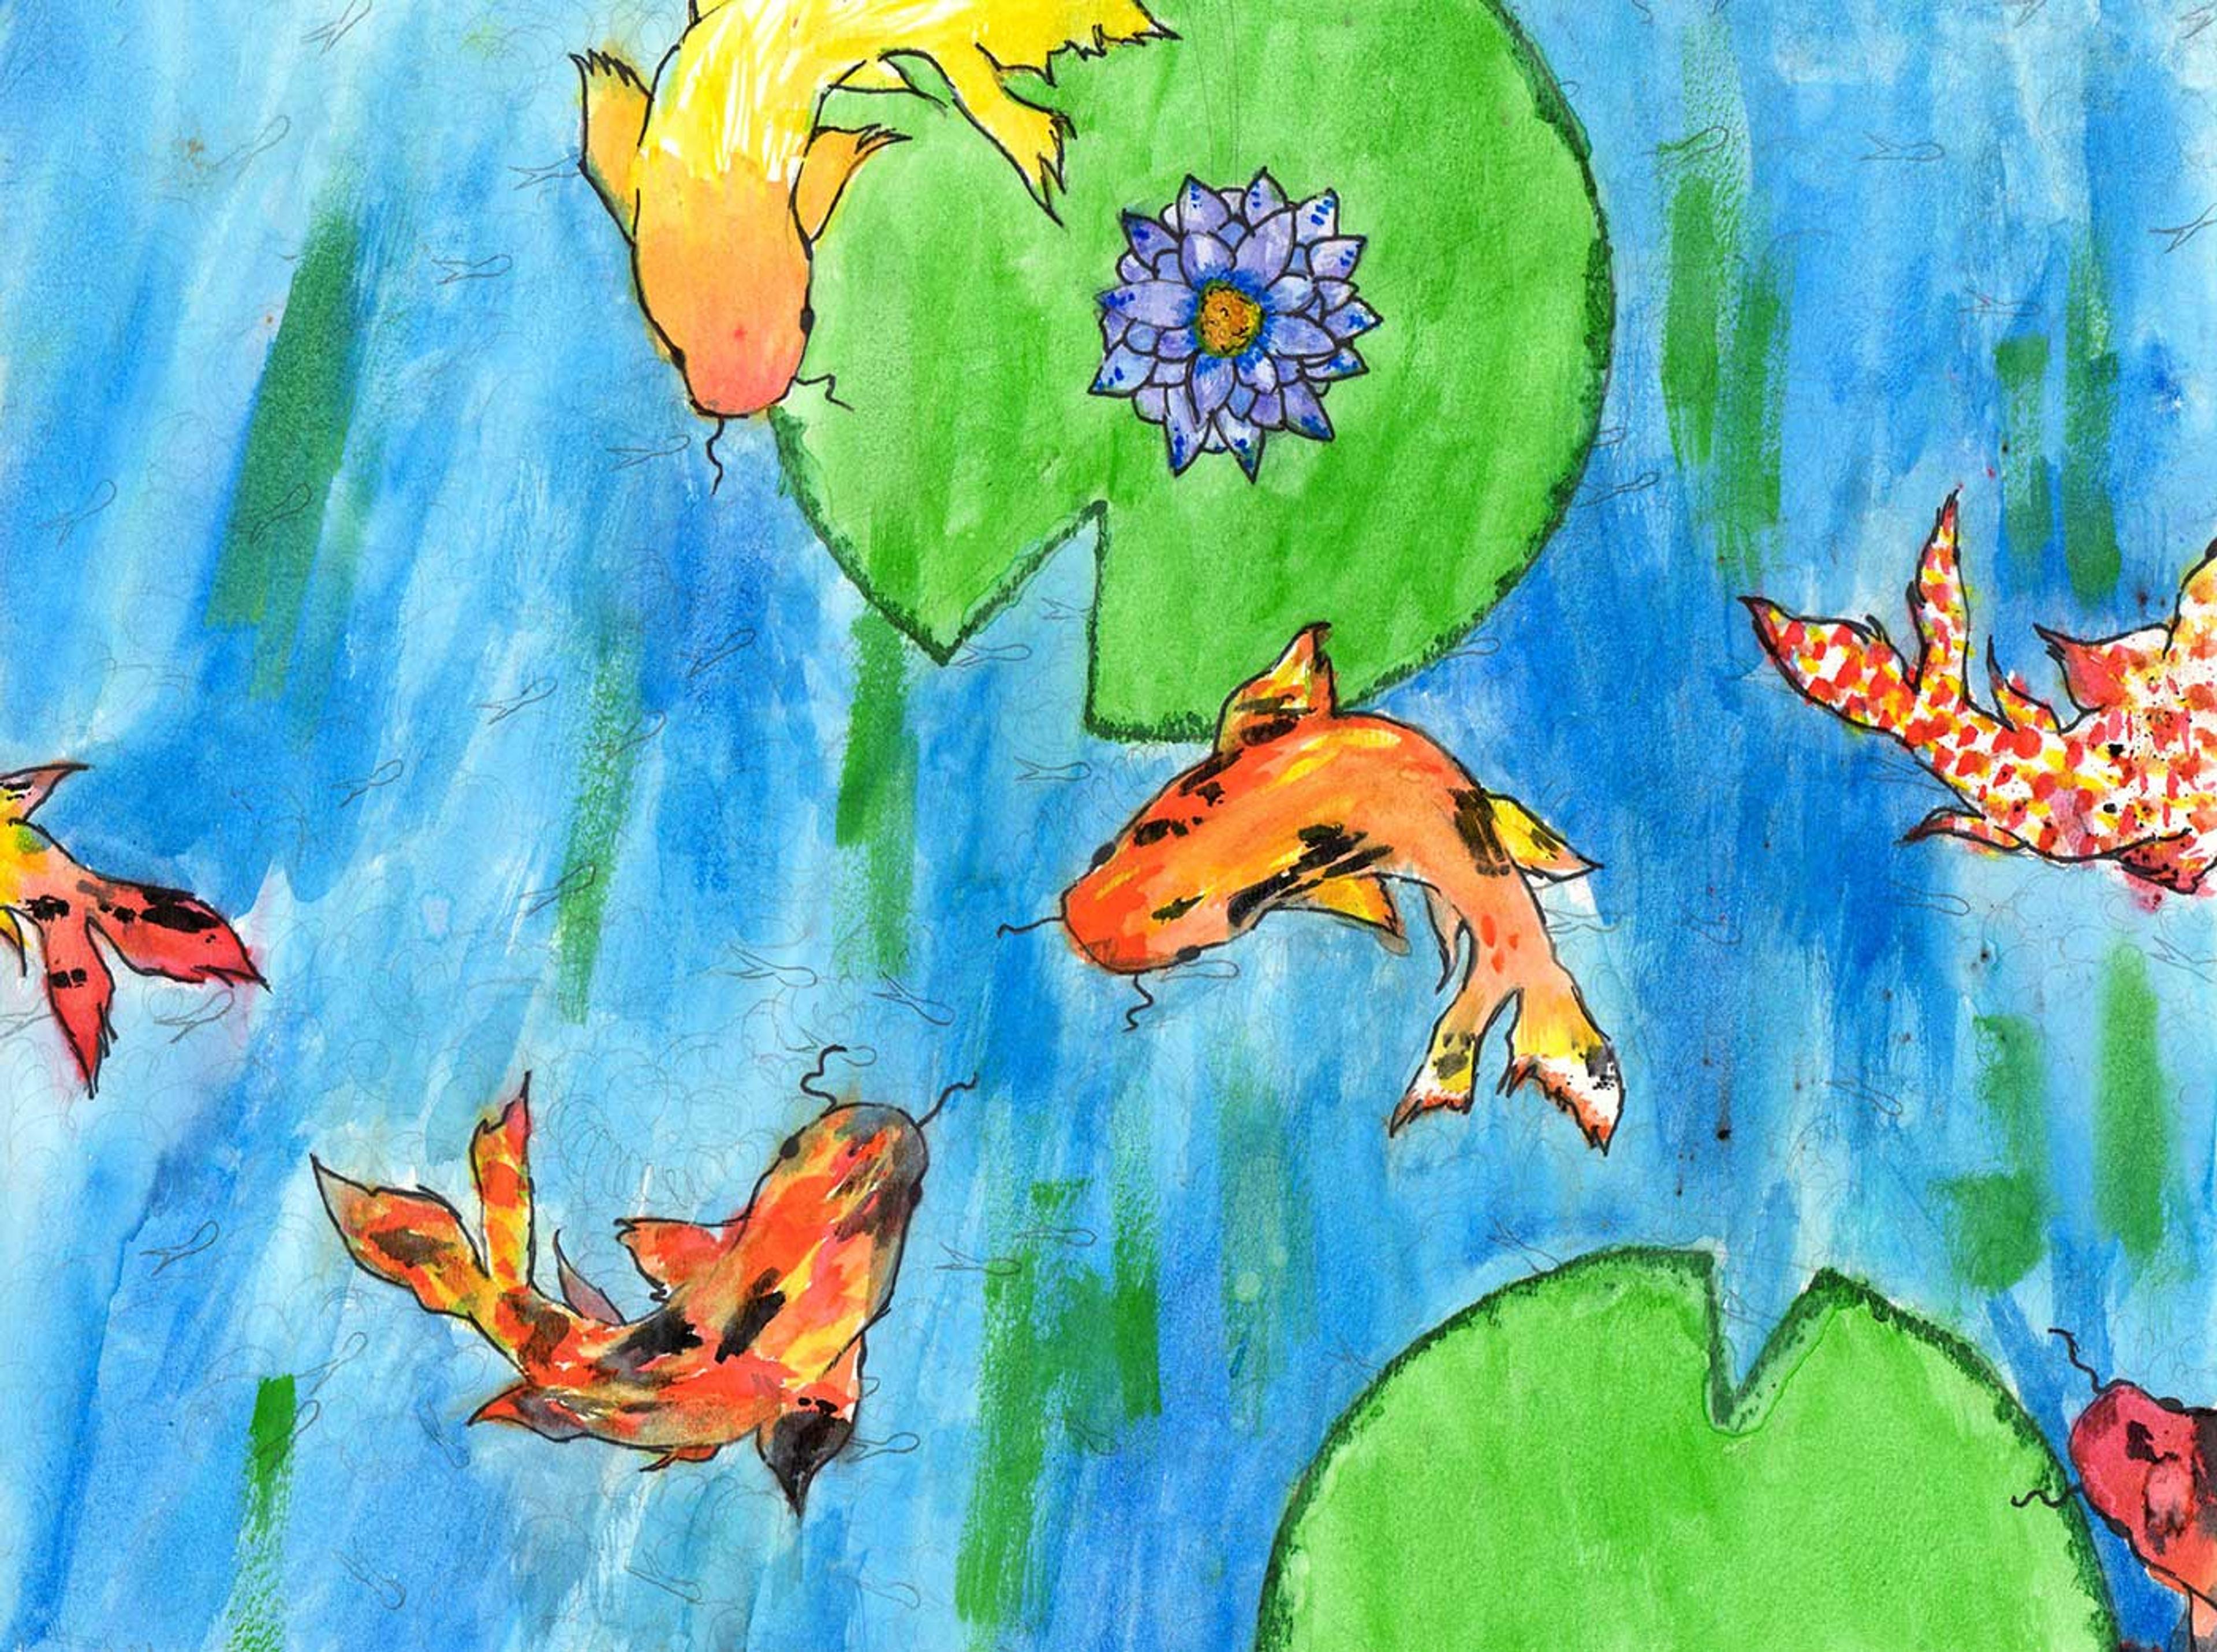 Painting of an aerial view of several fish swimming in a pond with plants and flowers.